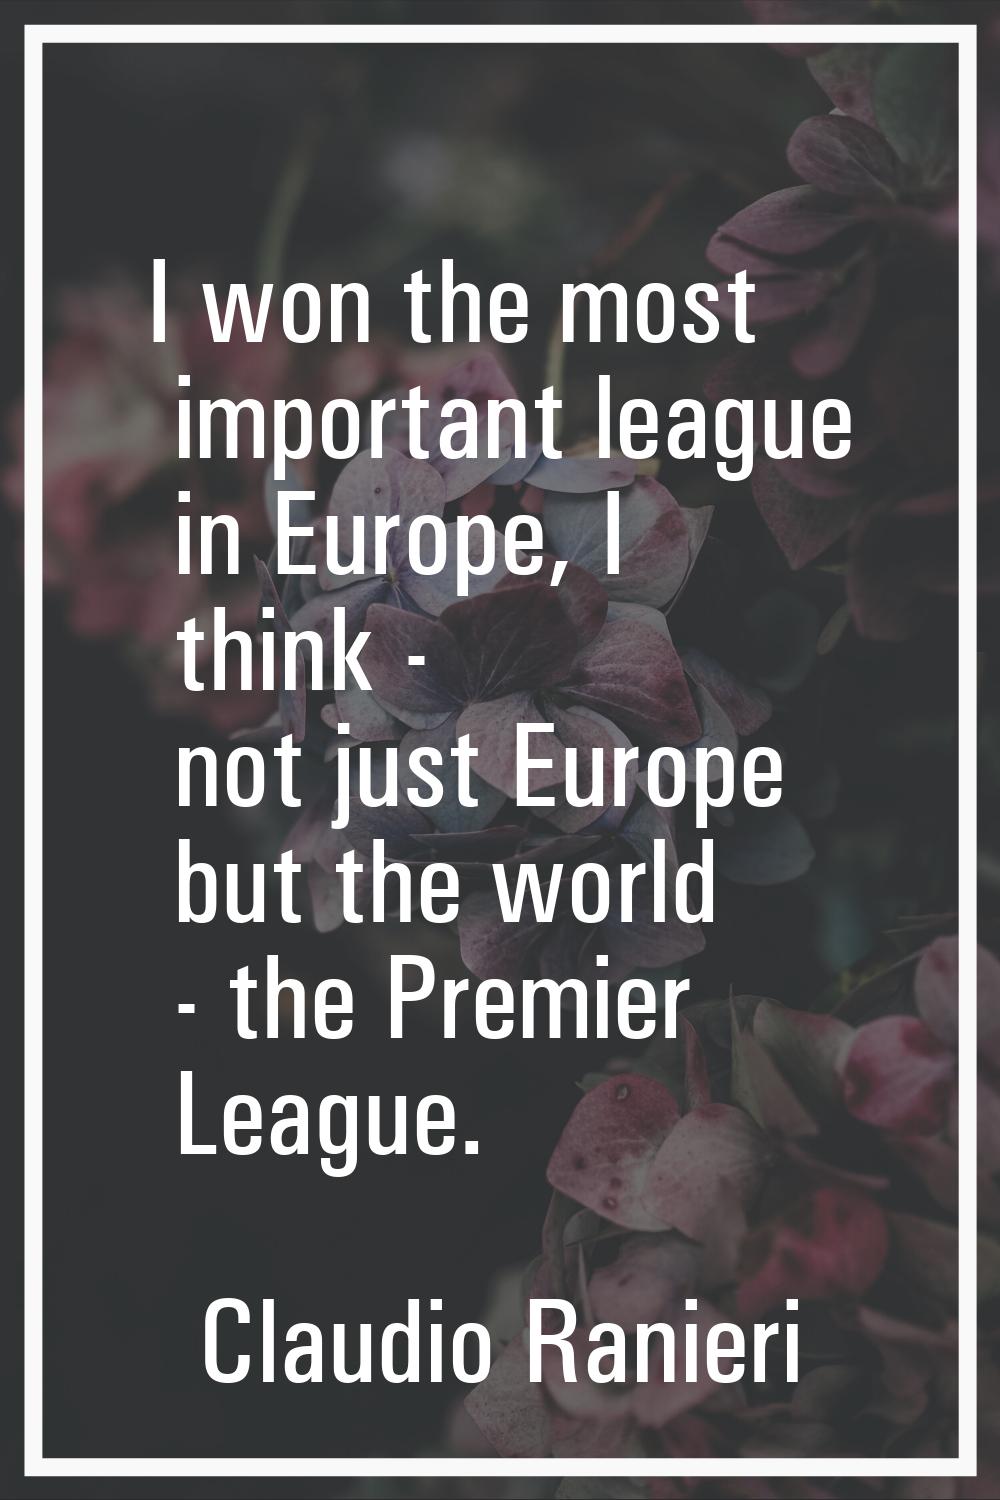 I won the most important league in Europe, I think - not just Europe but the world - the Premier Le